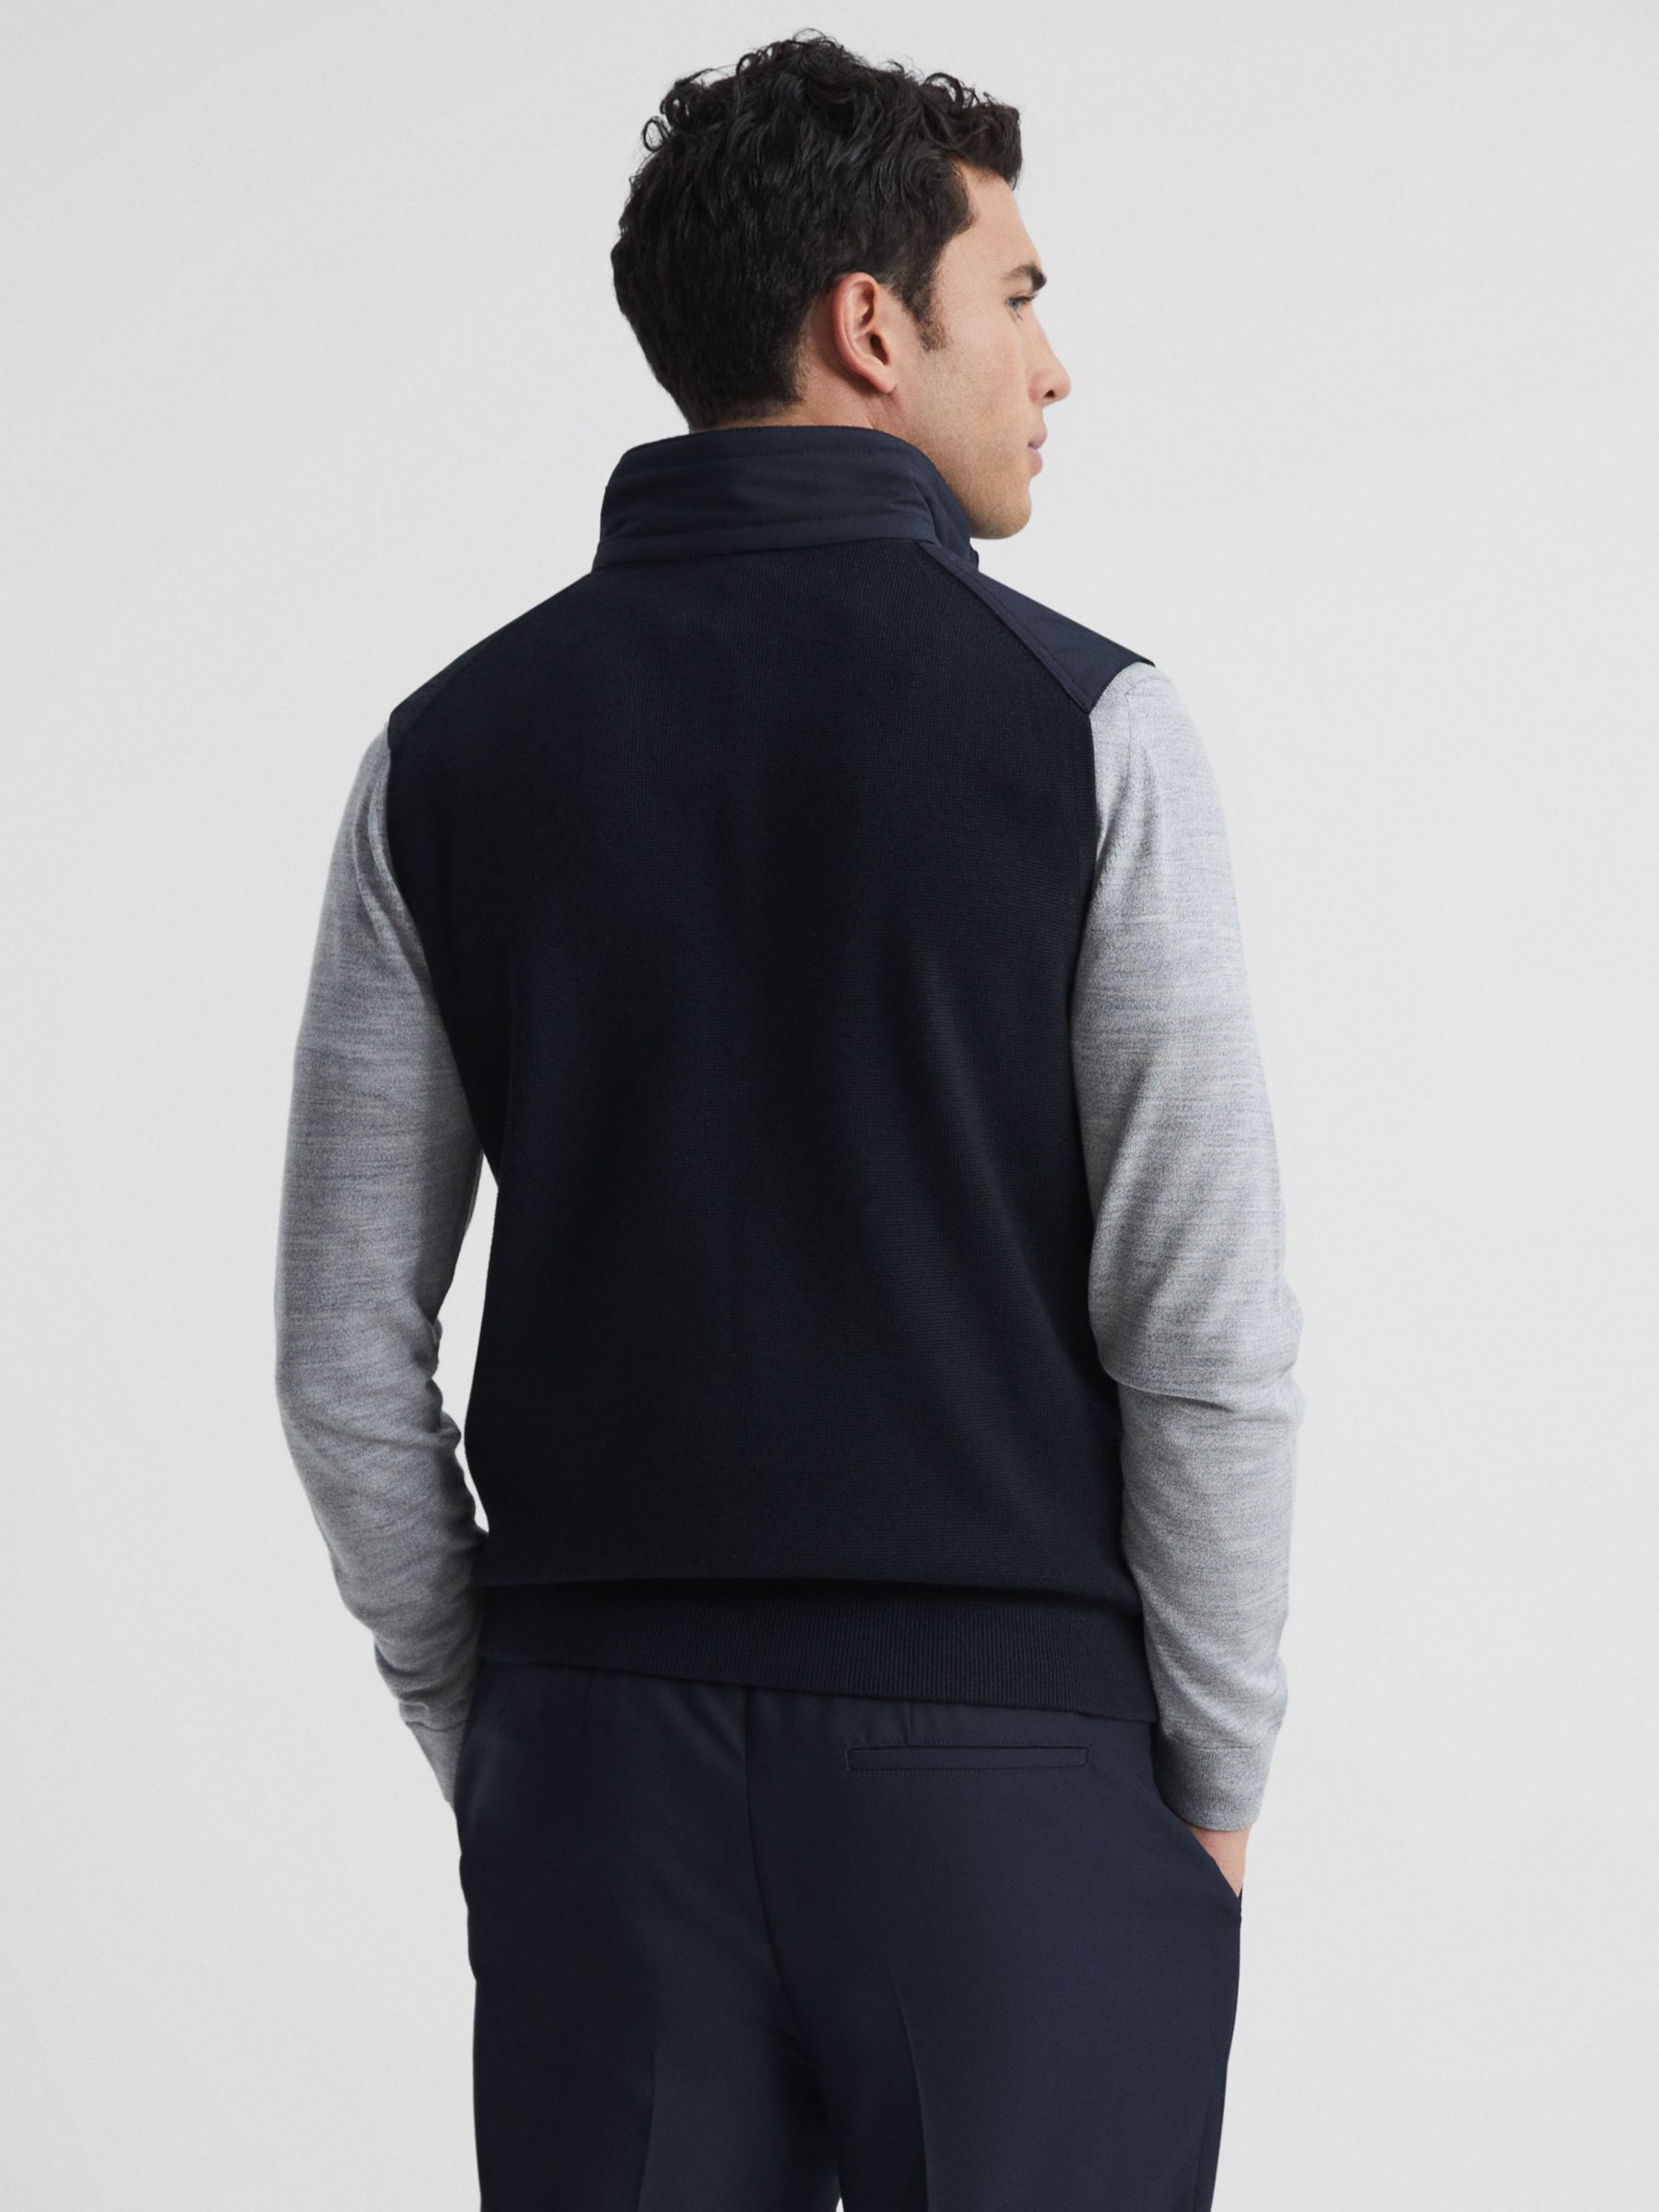 Reiss William Quilted Gilet, Navy at John Lewis & Partners